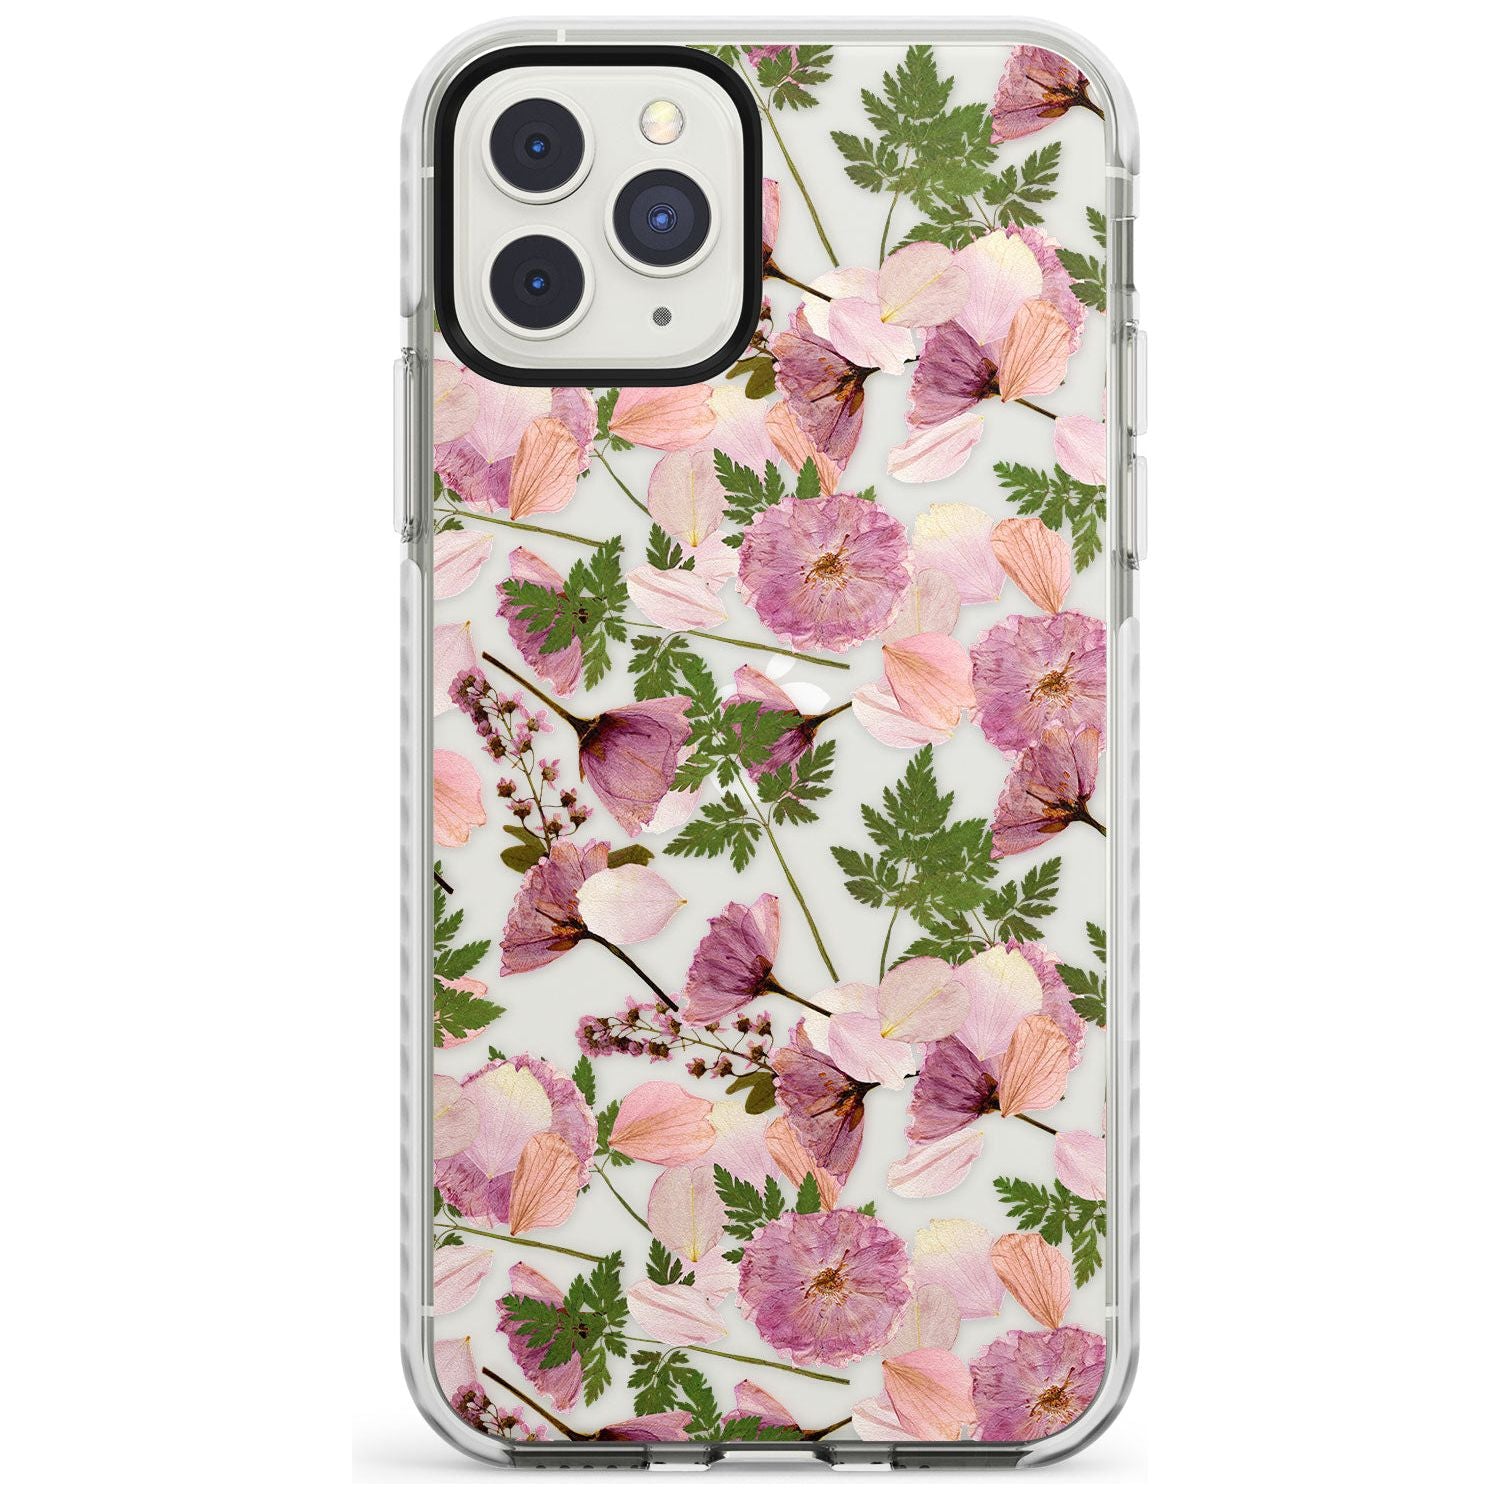 Leafy Floral Pattern Transparent Design Impact Phone Case for iPhone 11 Pro Max